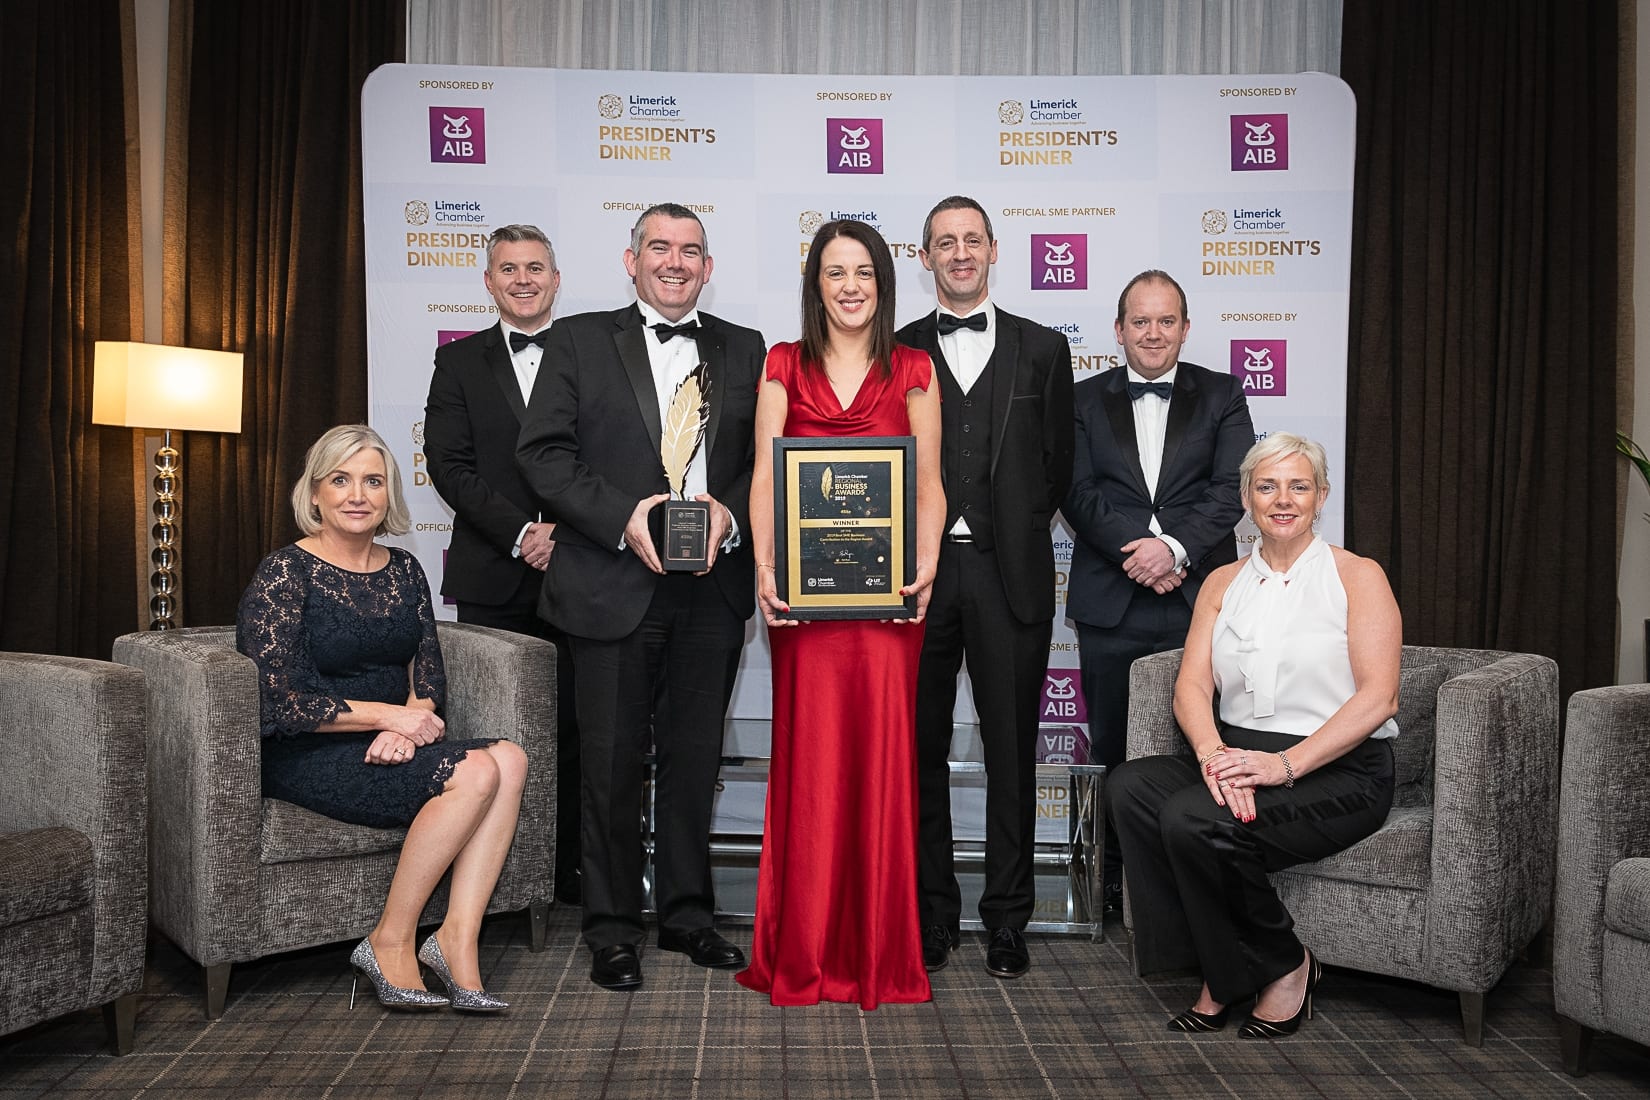 No repro fee-Limerick Chamber President’s Dinner
and Limerick Chamber Regional Business Awards 2019 which was held in the Strand Hotel on Friday 15th November /Best SME /  - From Left to Right: Judy Tighe - AIB / Sponsor,  Mark Doyle - AIB / Sponsor, Mark and Helen O’Connor - WINNER / 4Site, Kieran Considine - AIB / Sponsor, Conor O’Sullivan  - AIB / Sponsor, Hilary Gormily  - AIB / Sponsor. 
Photo credit Shauna Kennedy